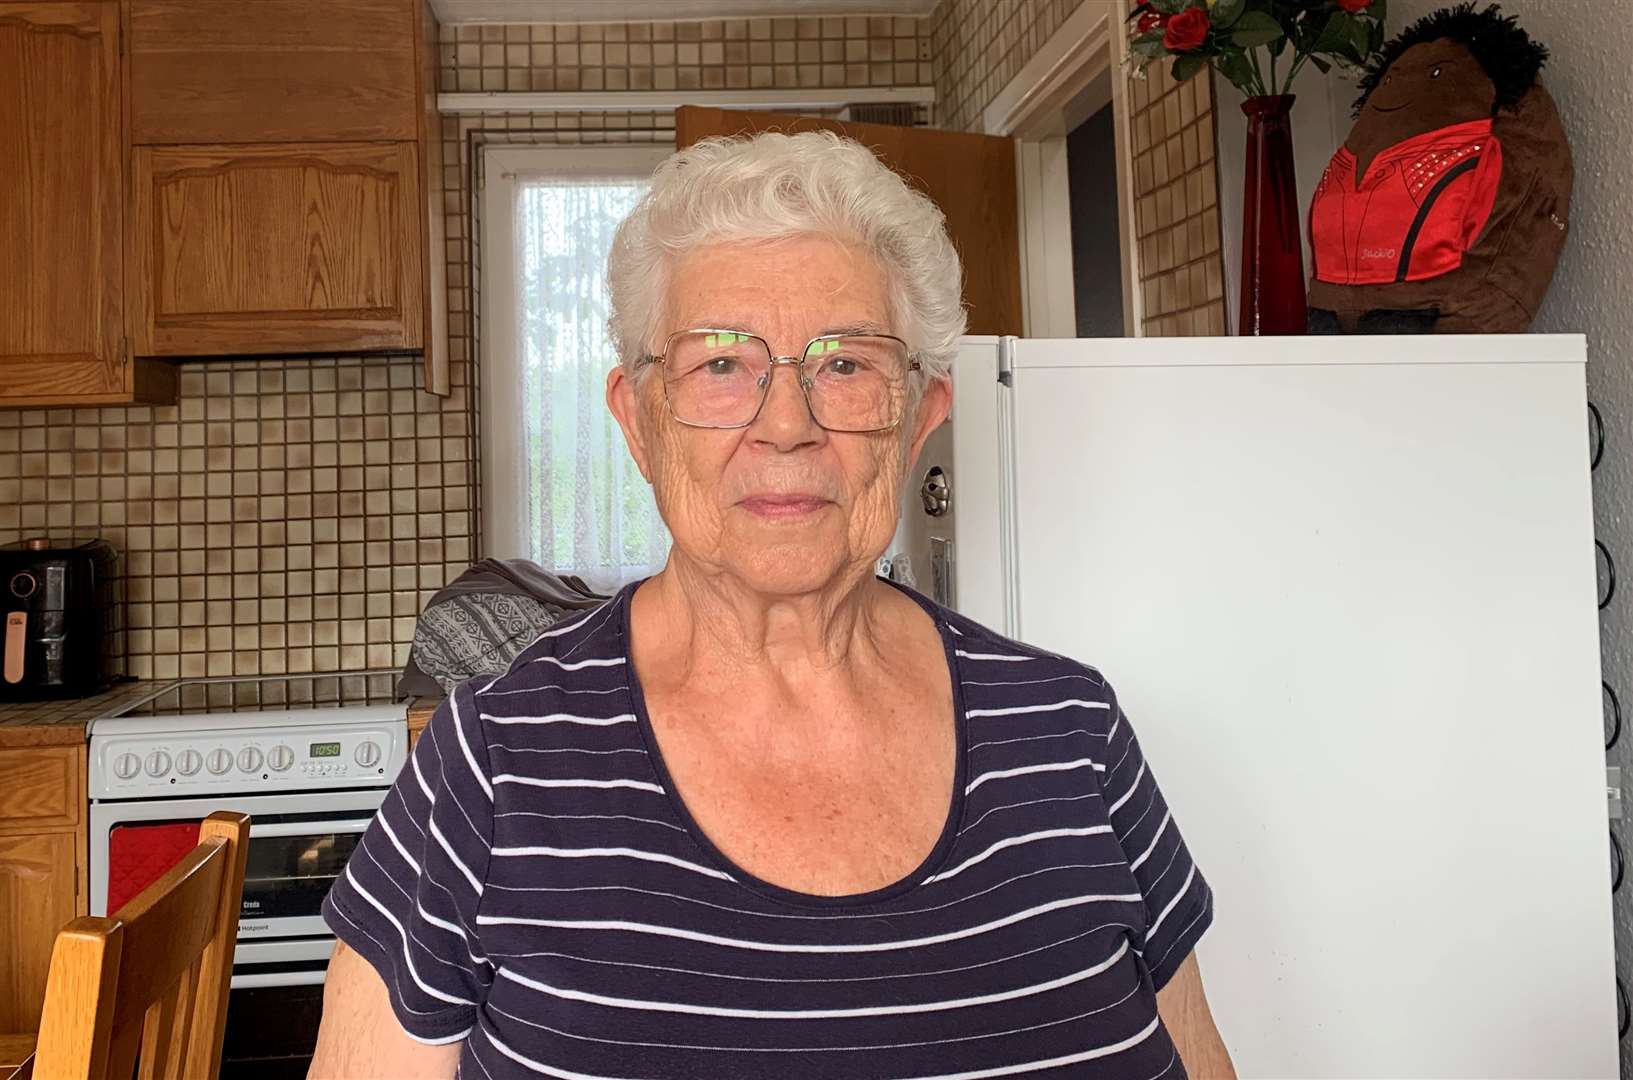 June Beaumont, 80, belives people should expect noise if they live next to Lydd army camp